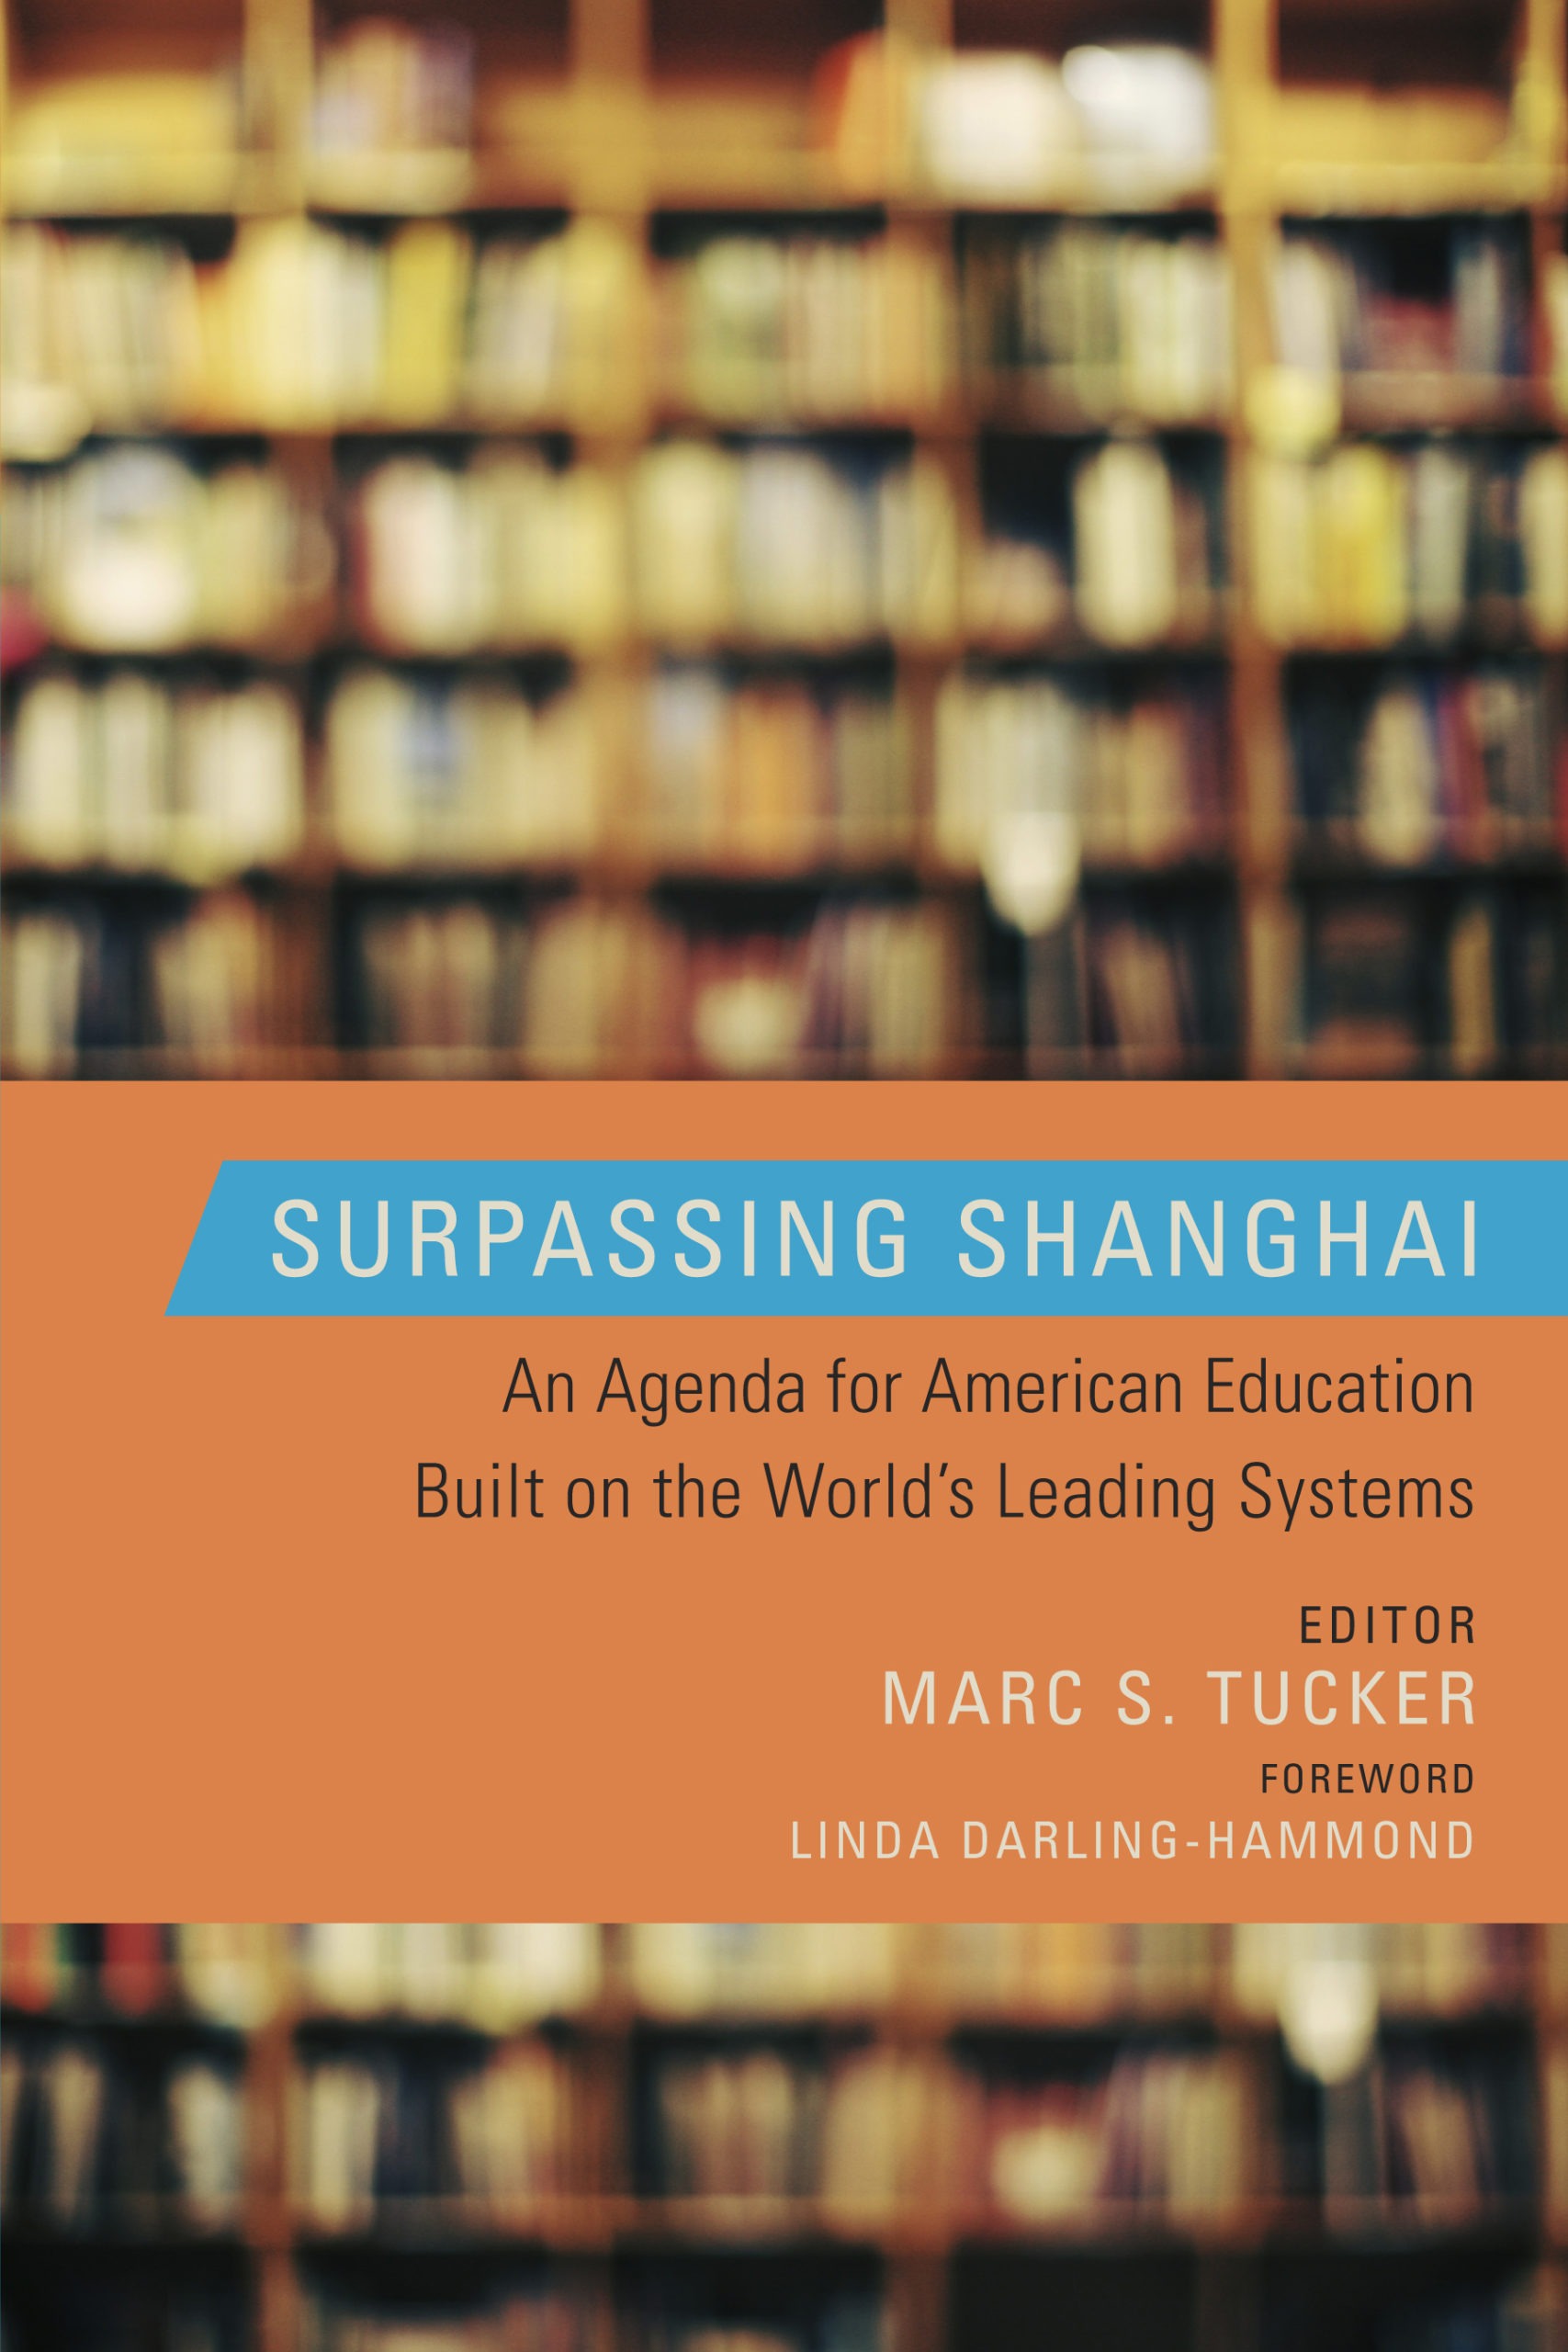 Surpassing Shanghai: An Agenda for American Education Built on the World’s Leading Systems